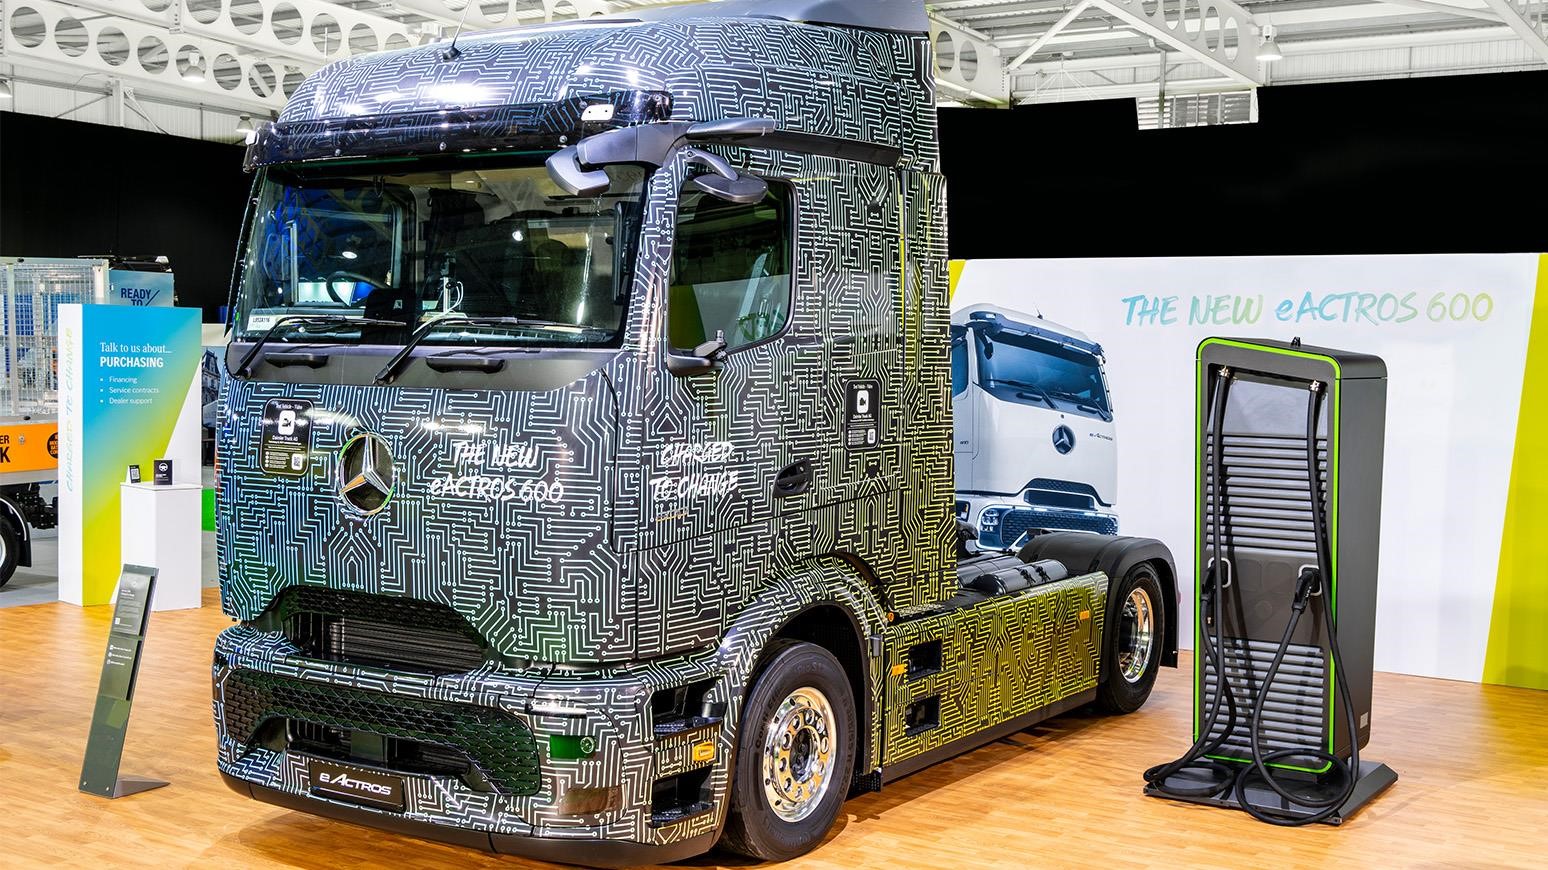 Mercedes-Benz Introduces New eActros 600 Long-Haul Electric Truck